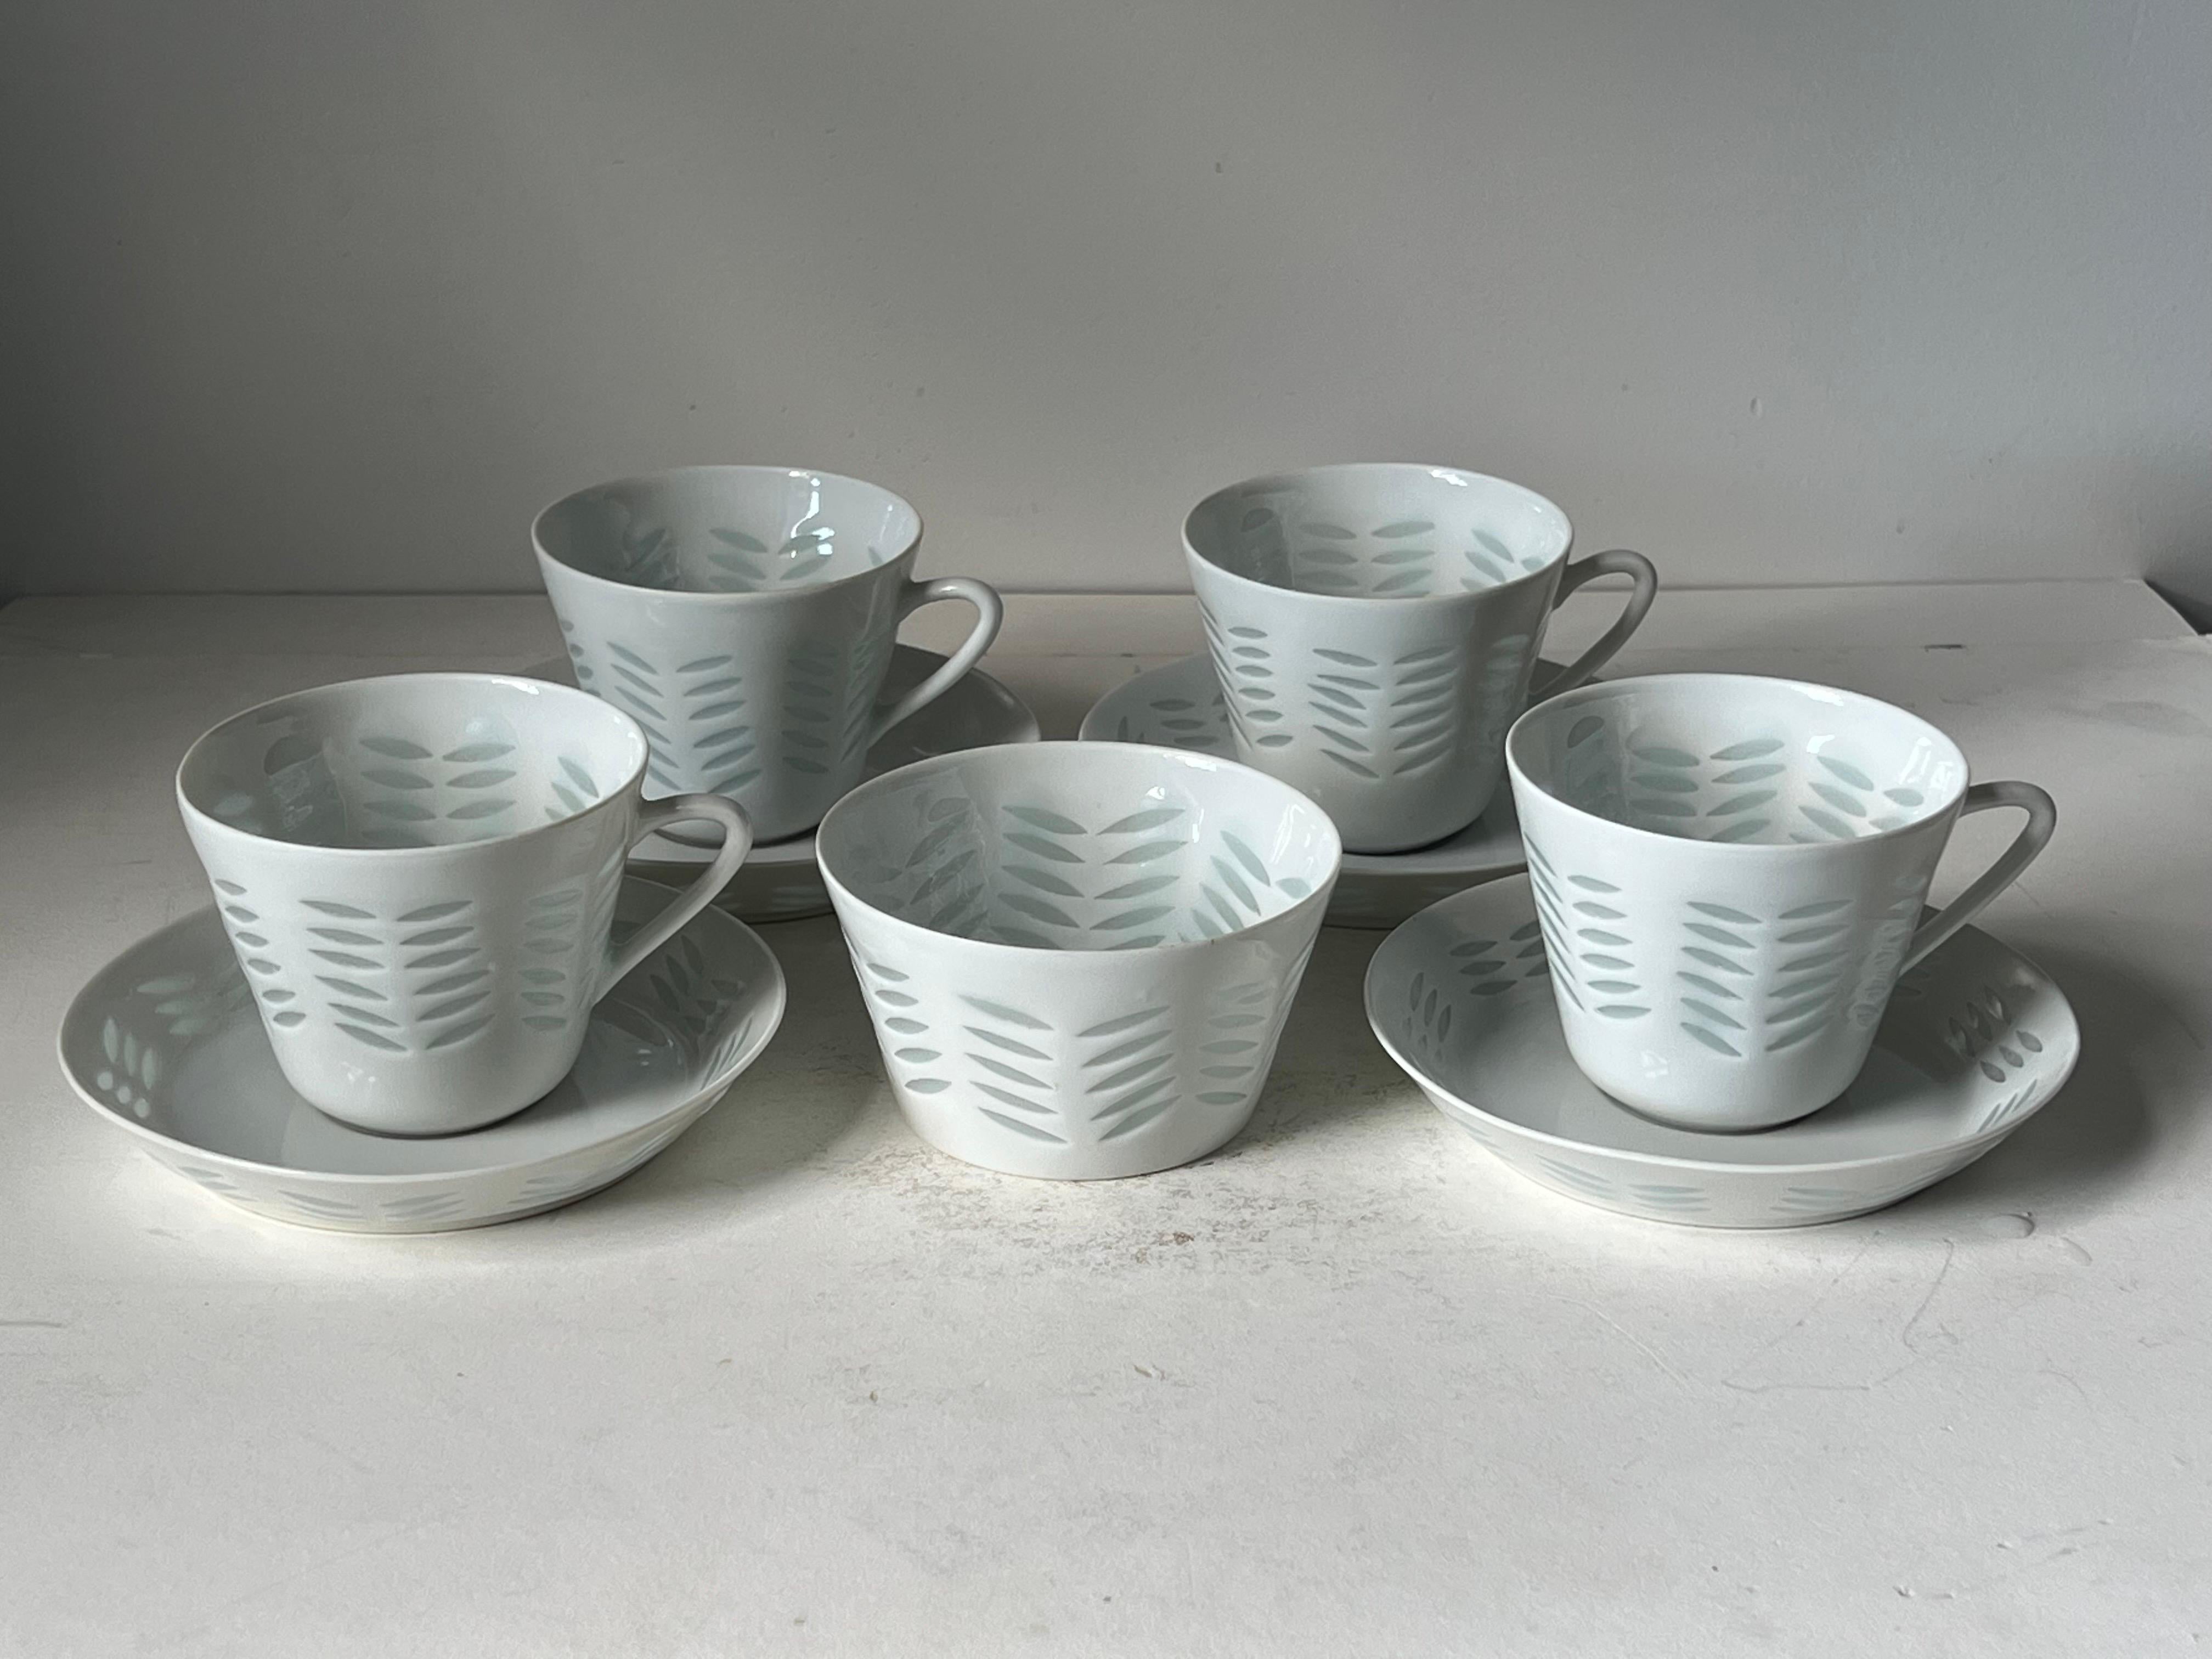 25 piece rice porcelain set designed by Friedl Holzer-Kjellberg for Arabia.
Set has 12 plates, 12 cups and small sugar bowl.
The plate measures 4.75